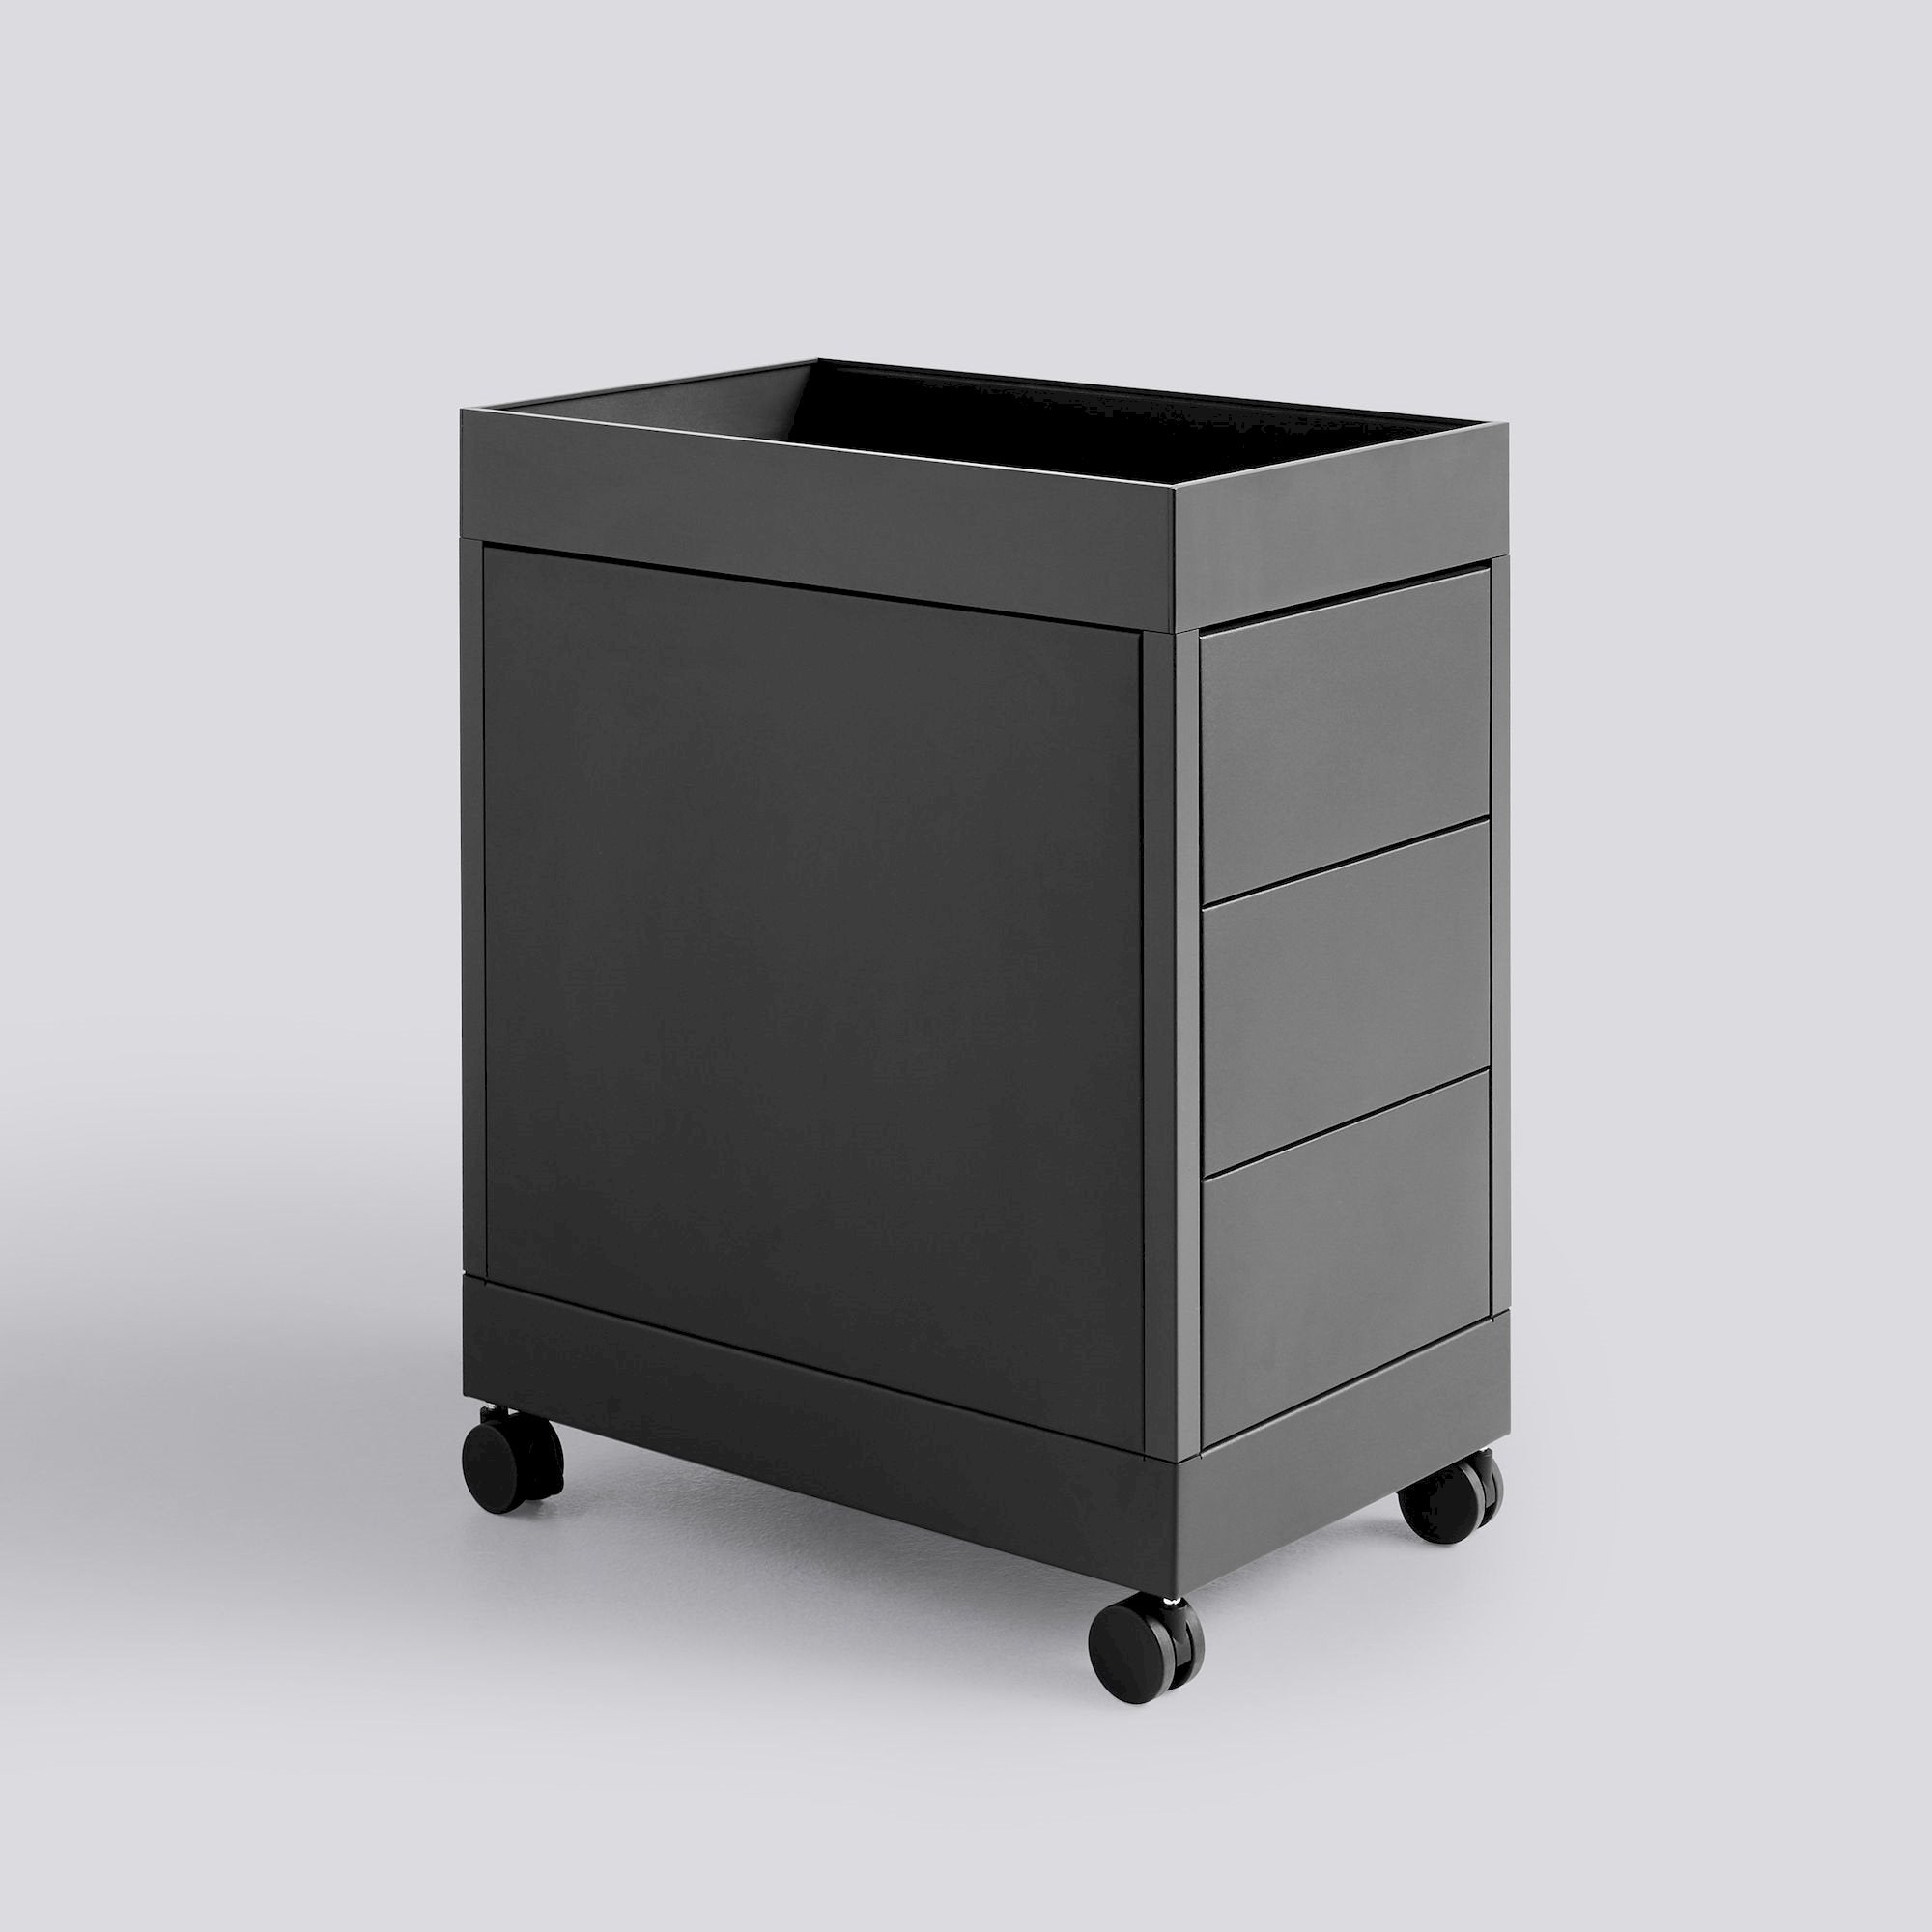 New order Trolley B 3 drawers & tray top